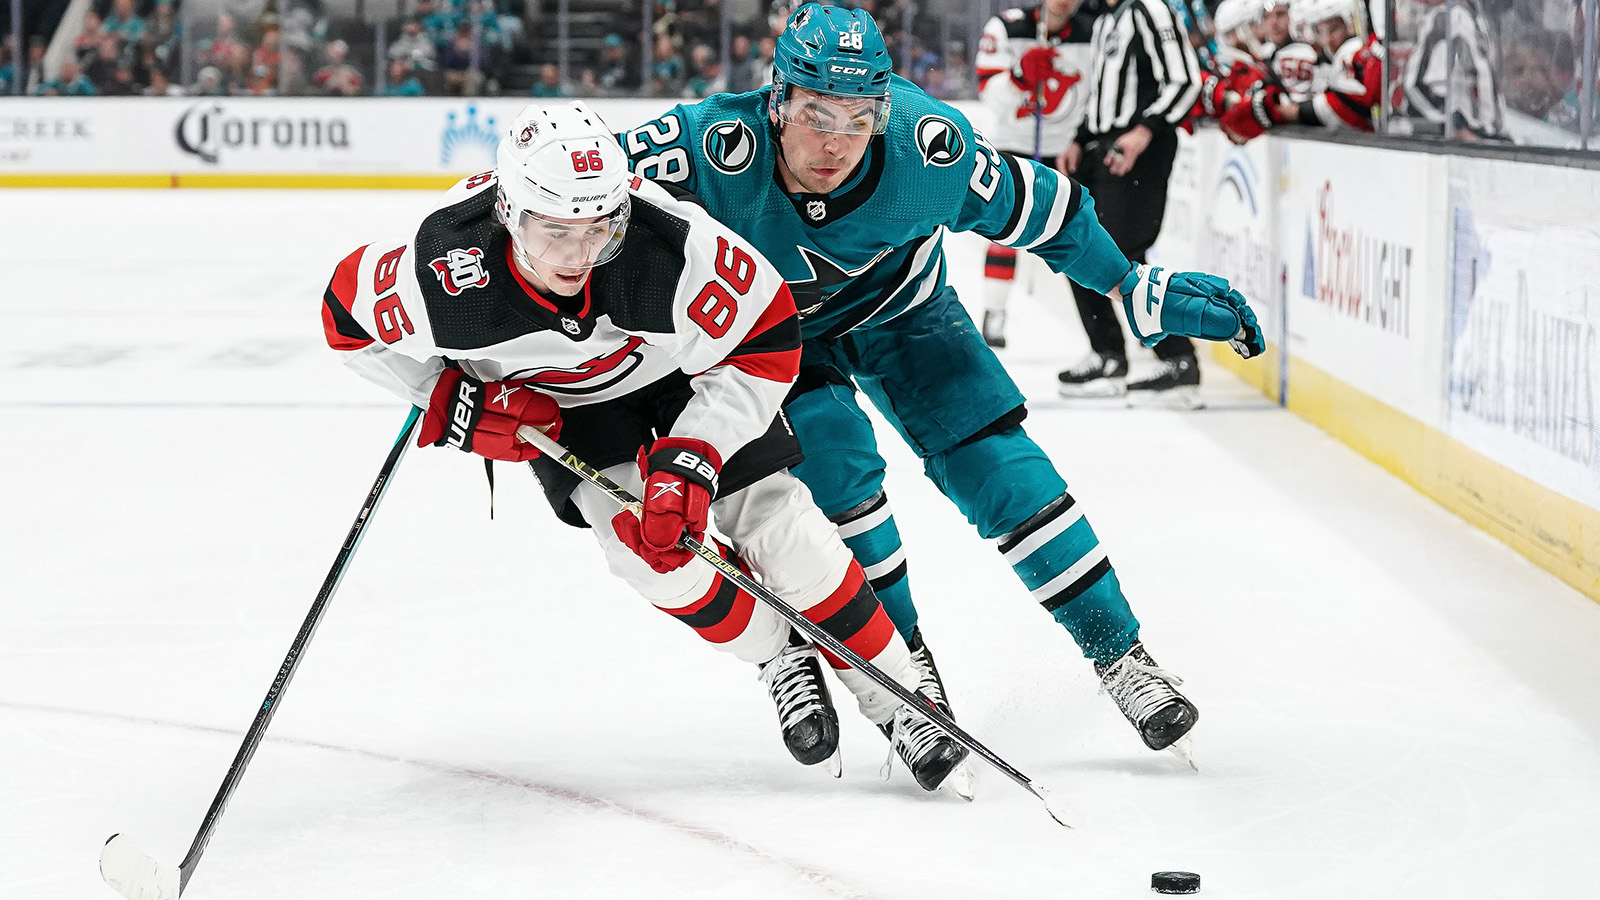 If Rumored Price Is True, Devils Should Walk Away From Timo Meier